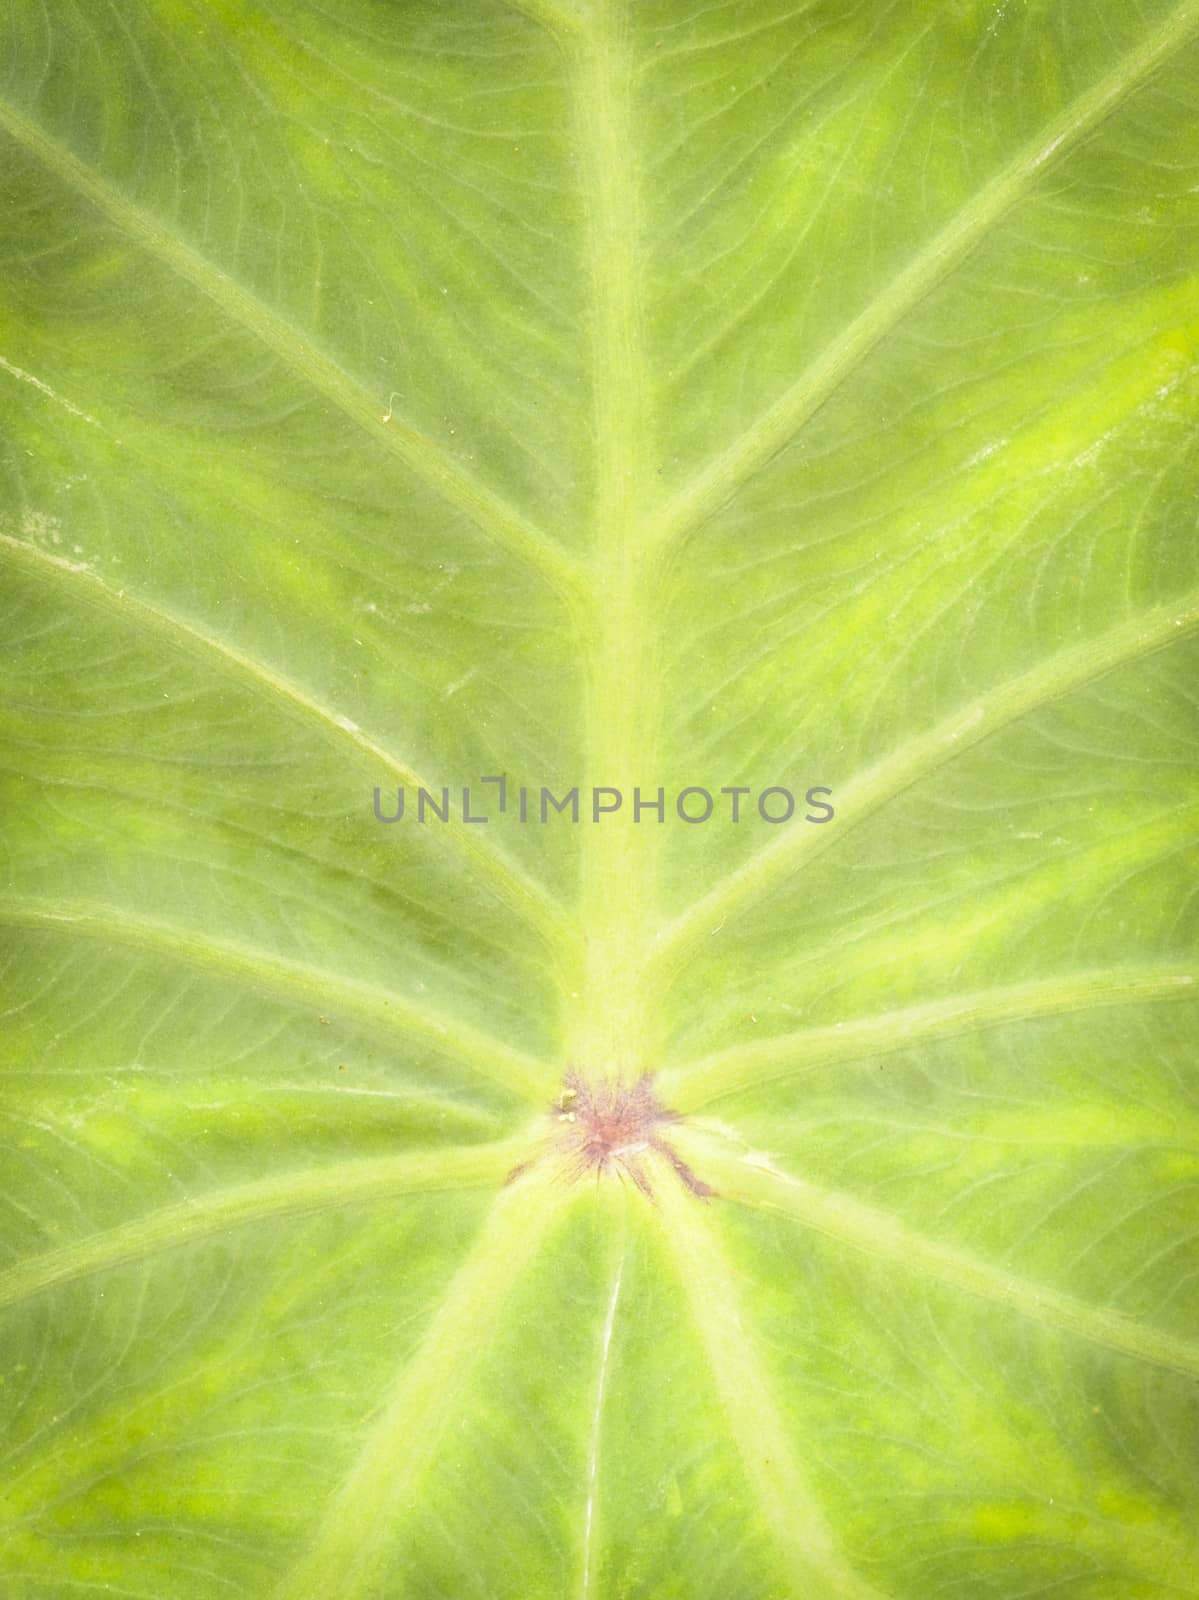 This texture background green leaf. by ngungfoto